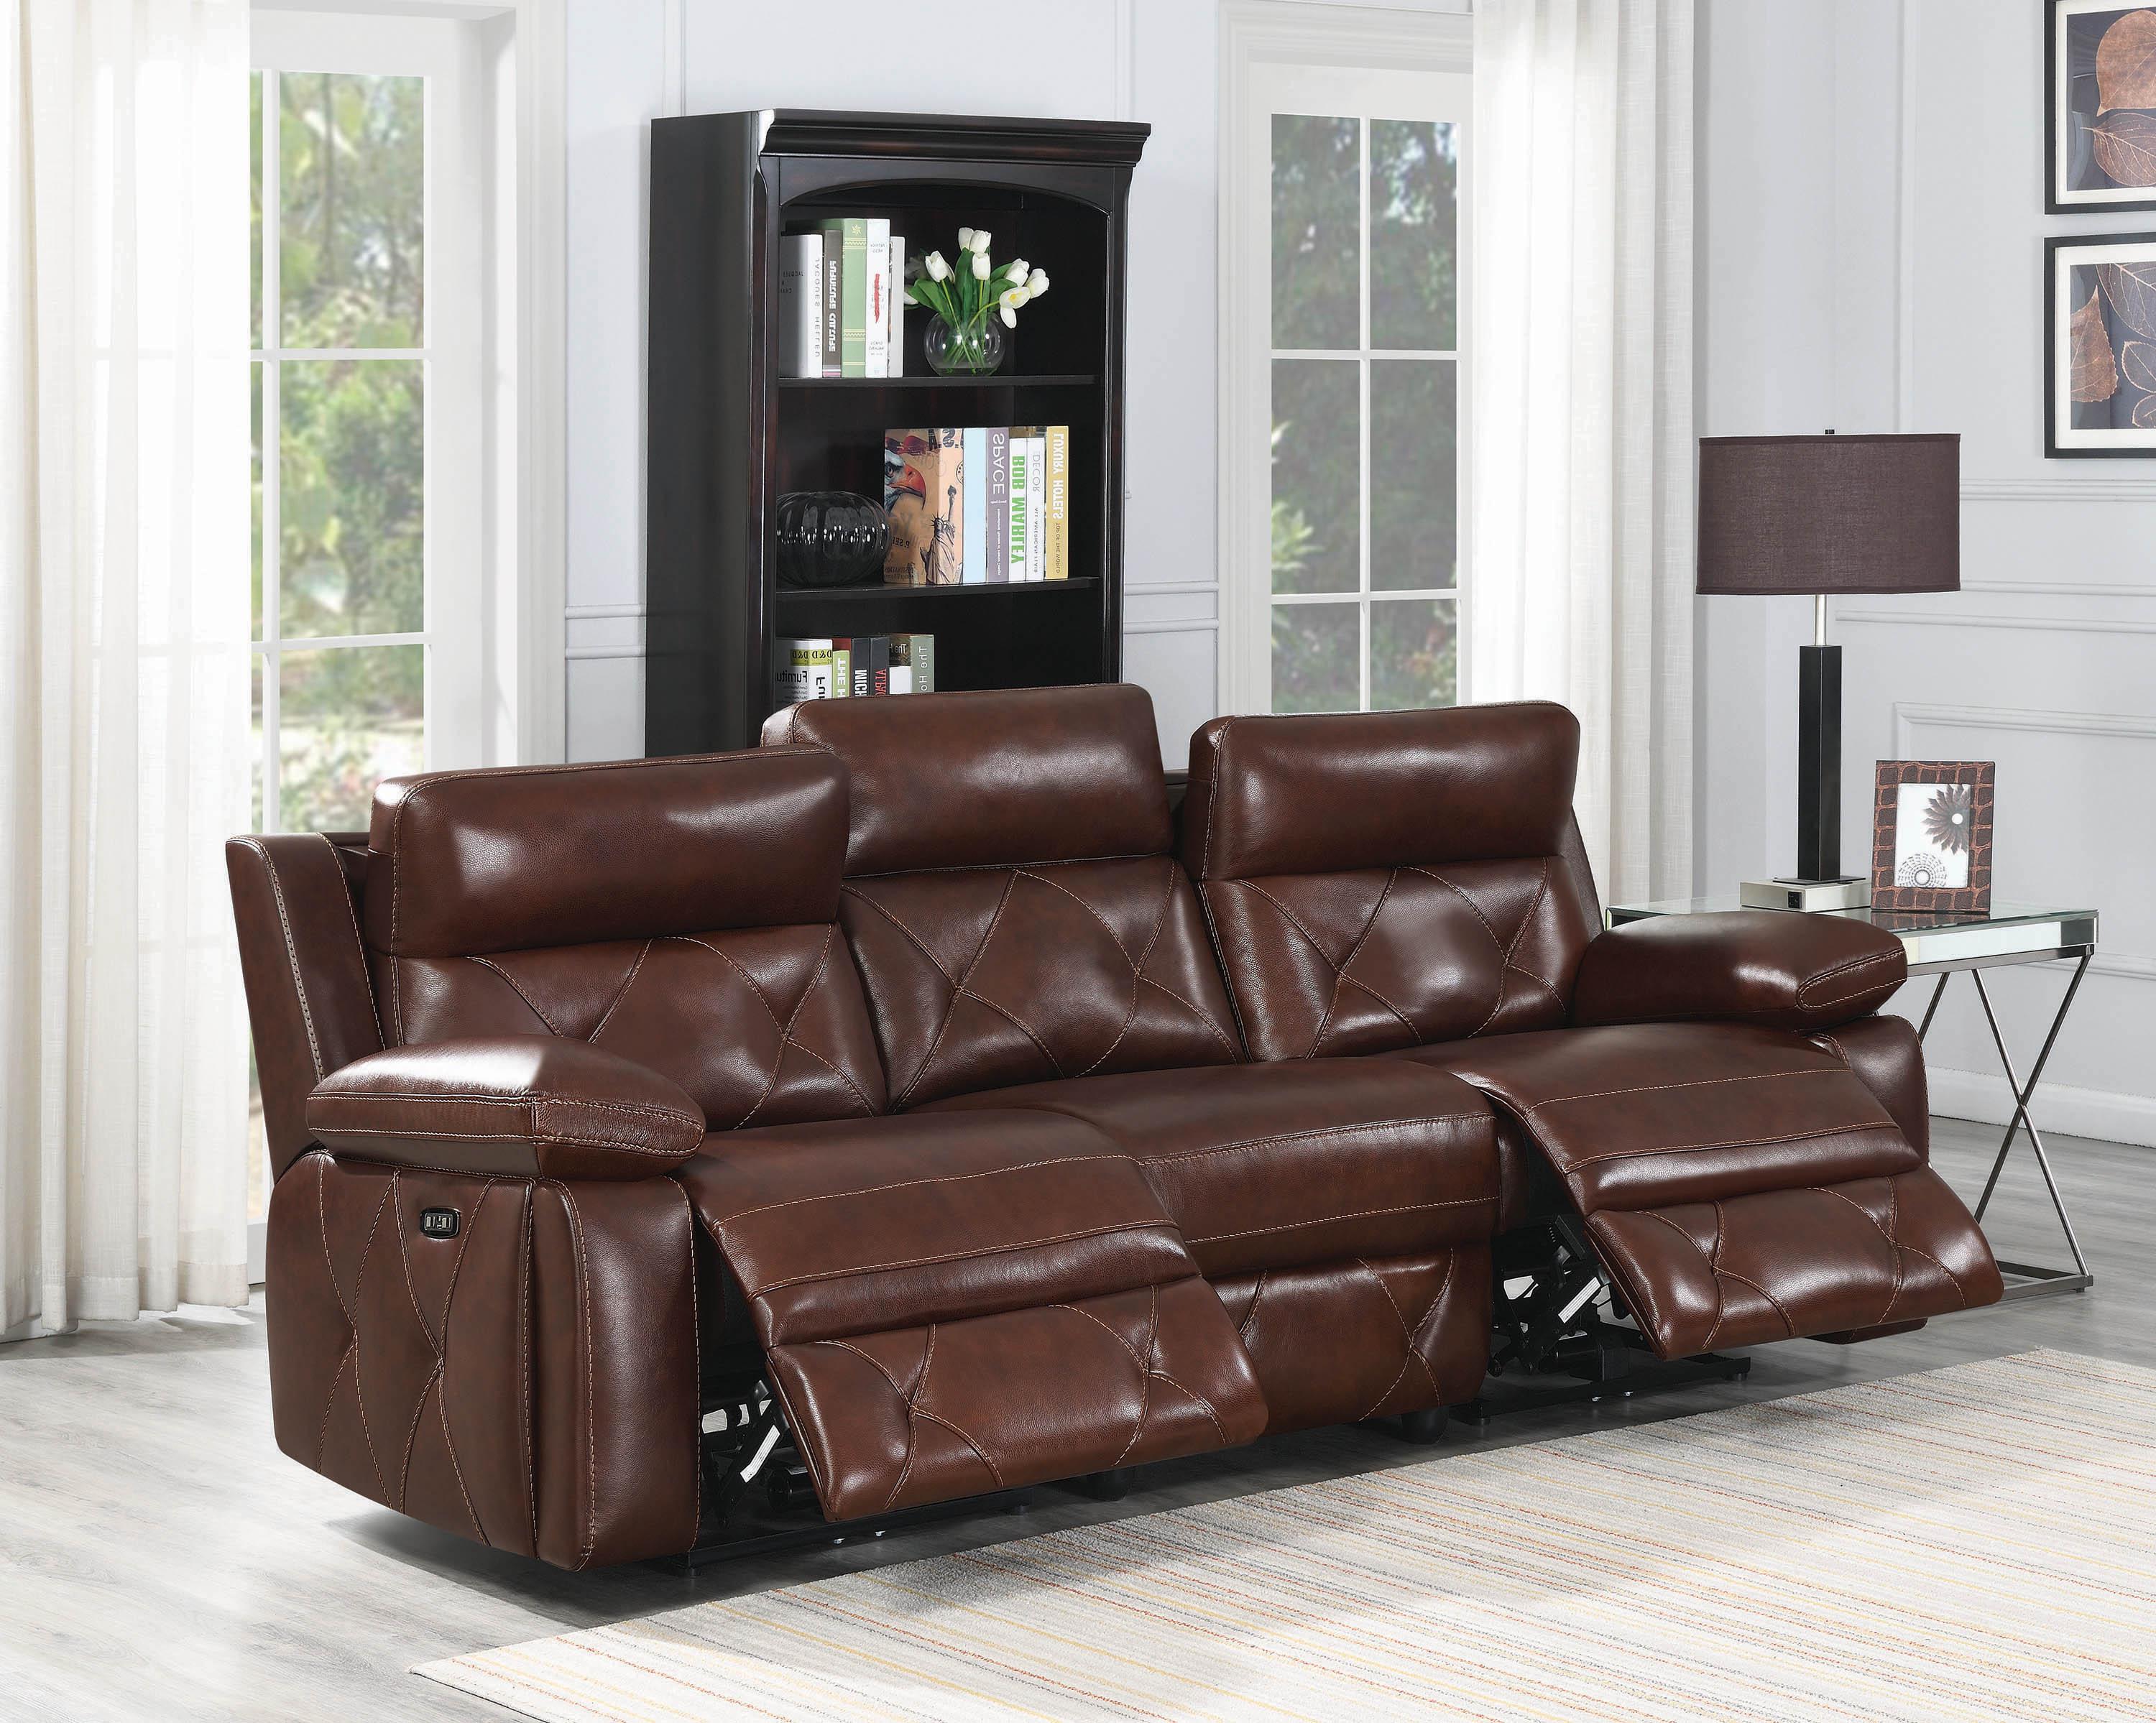 

    
Coaster 603441PP Chester Power Reclining Sofa Chocolate 603441PP
